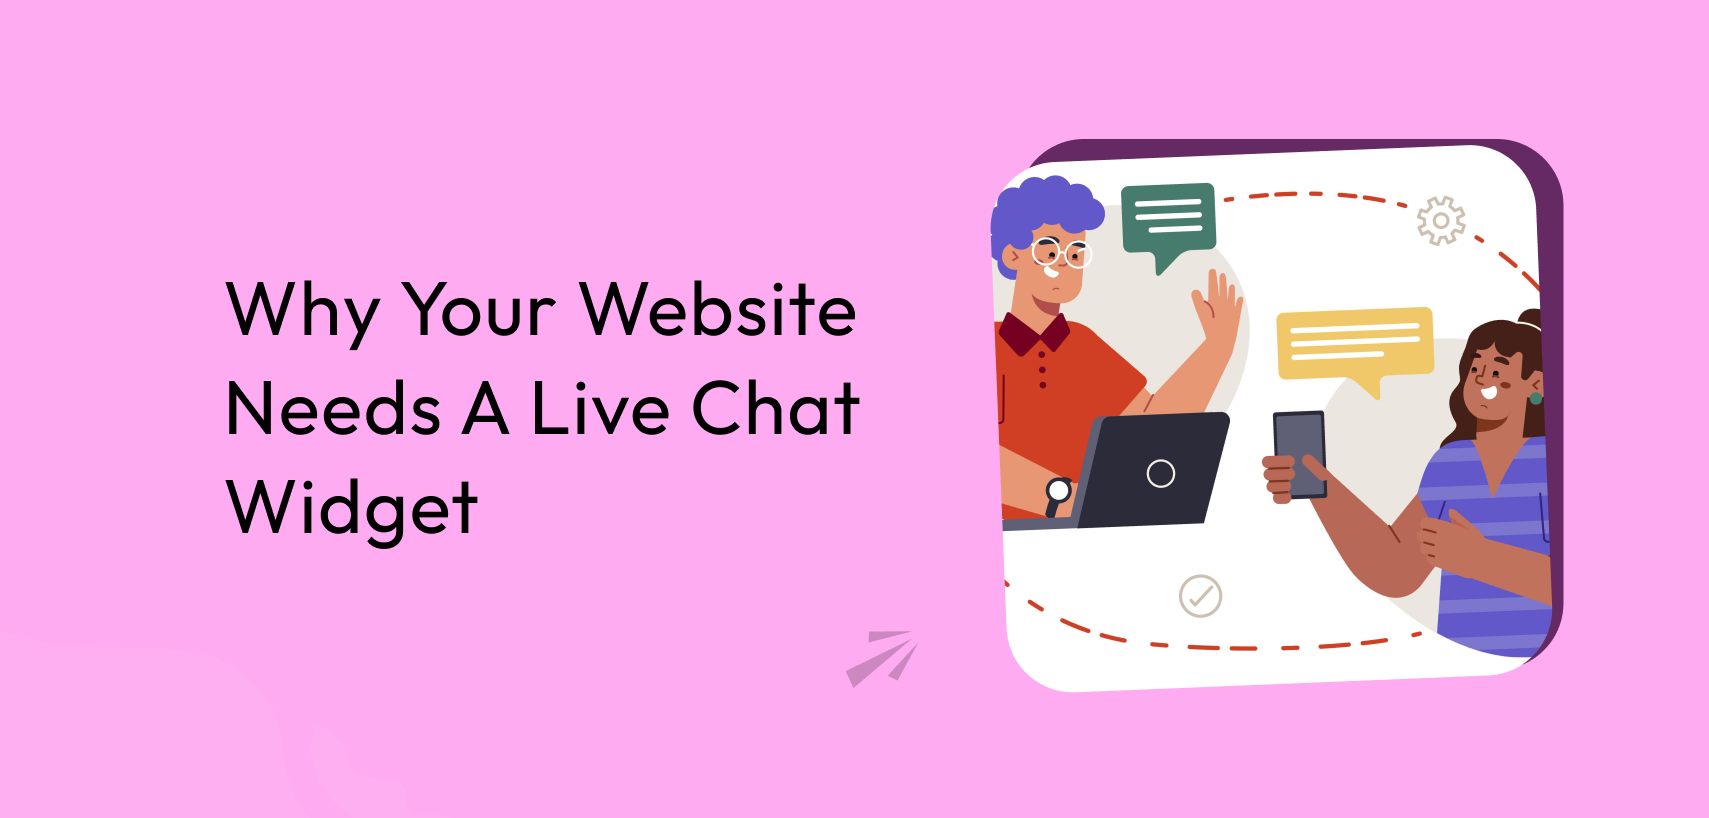 Why your website needs a live chat widget